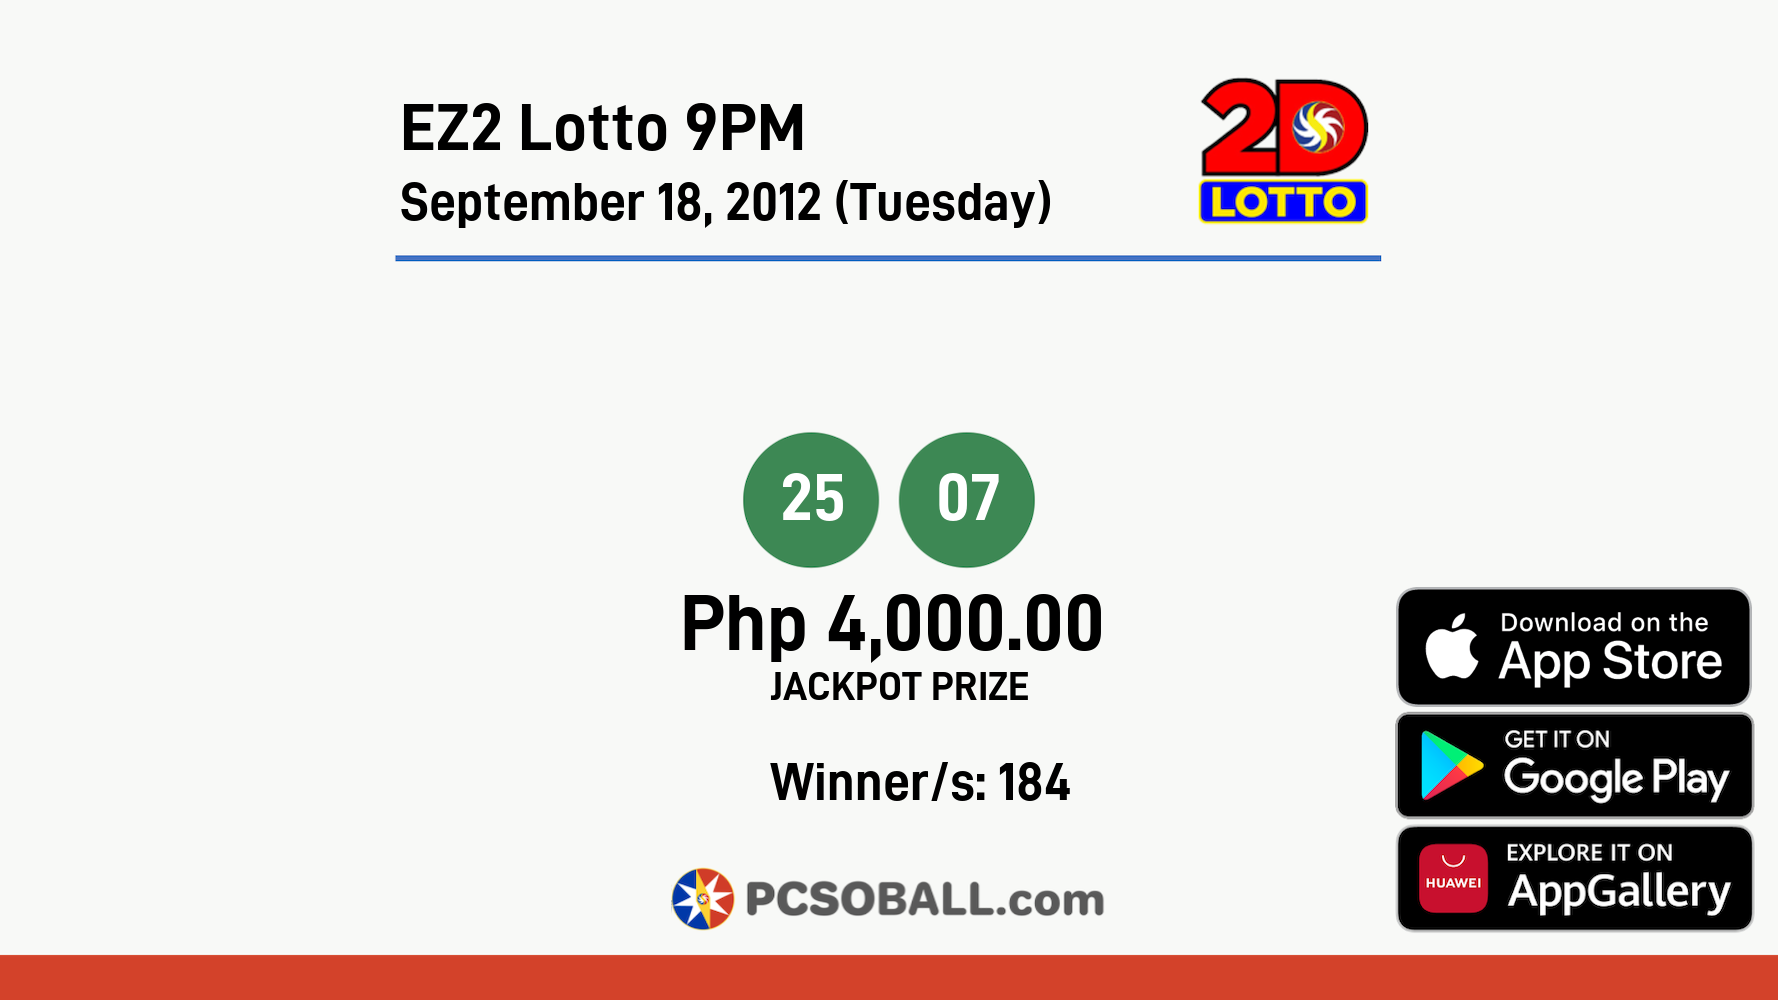 EZ2 Lotto 9PM September 18, 2012 (Tuesday) Result